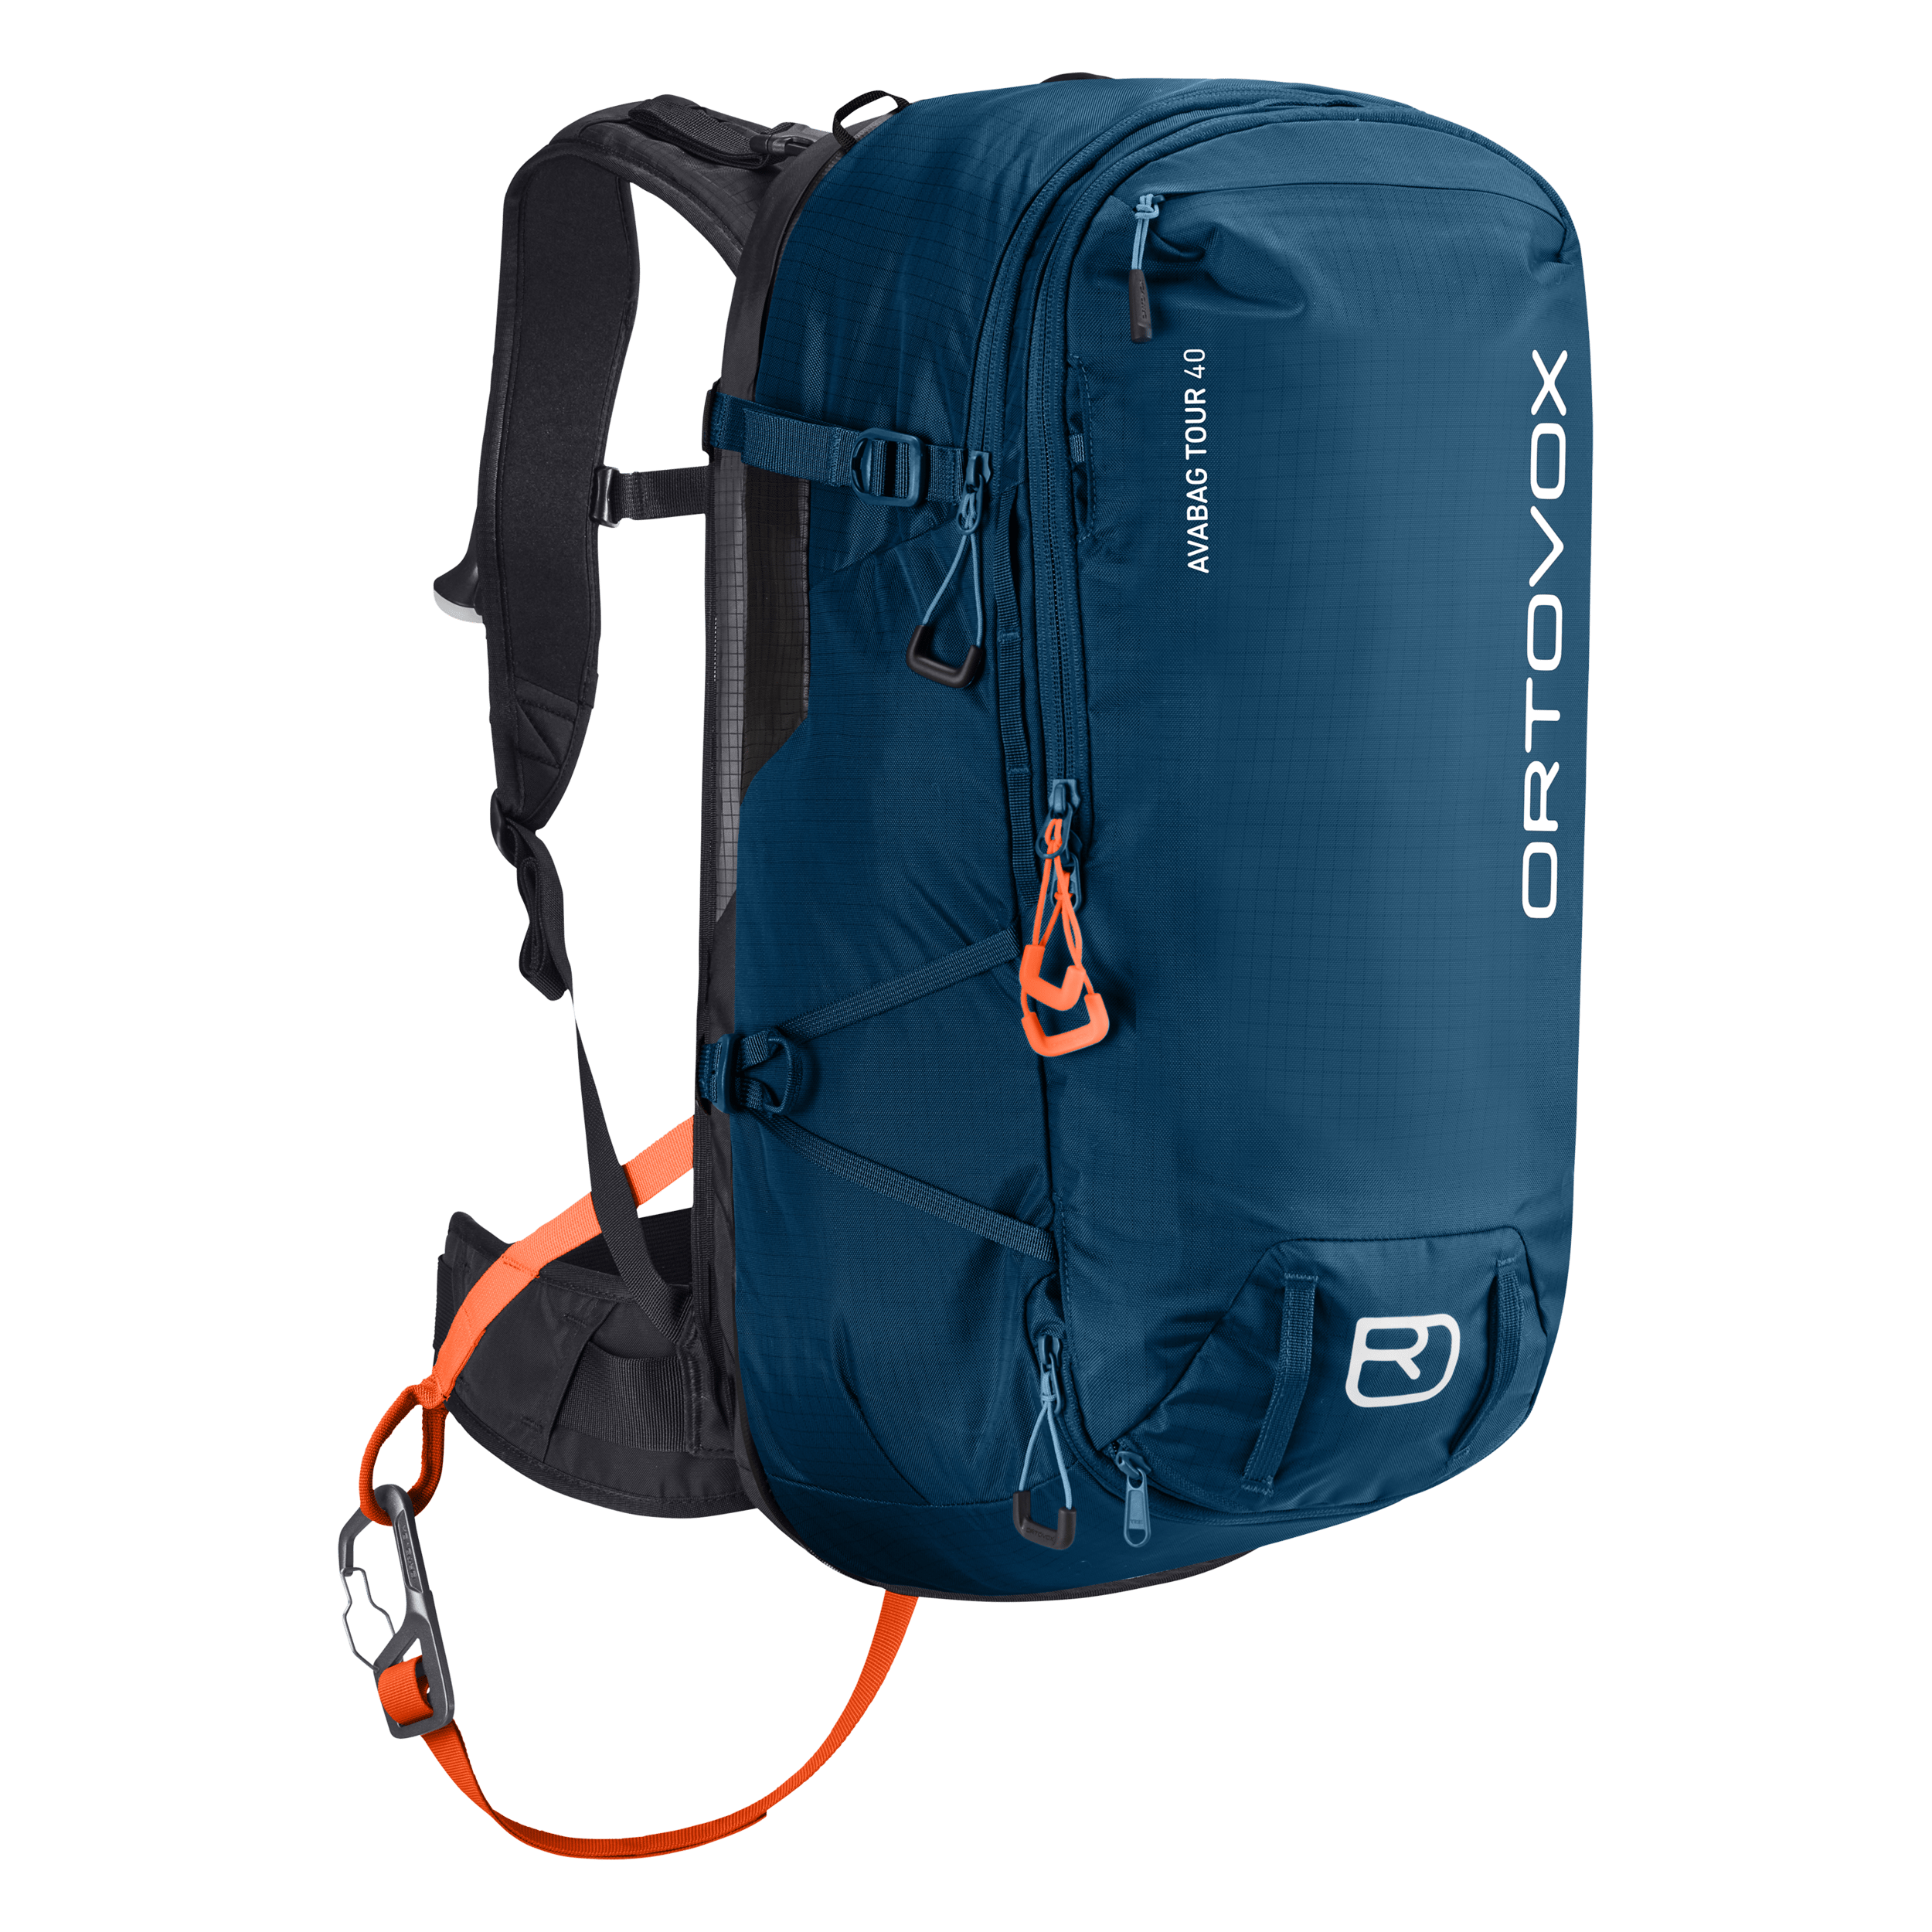 ortovox Avalanche Airbag Petrol Blue Litric Tour 40 Avalanche Airbag 49227PB